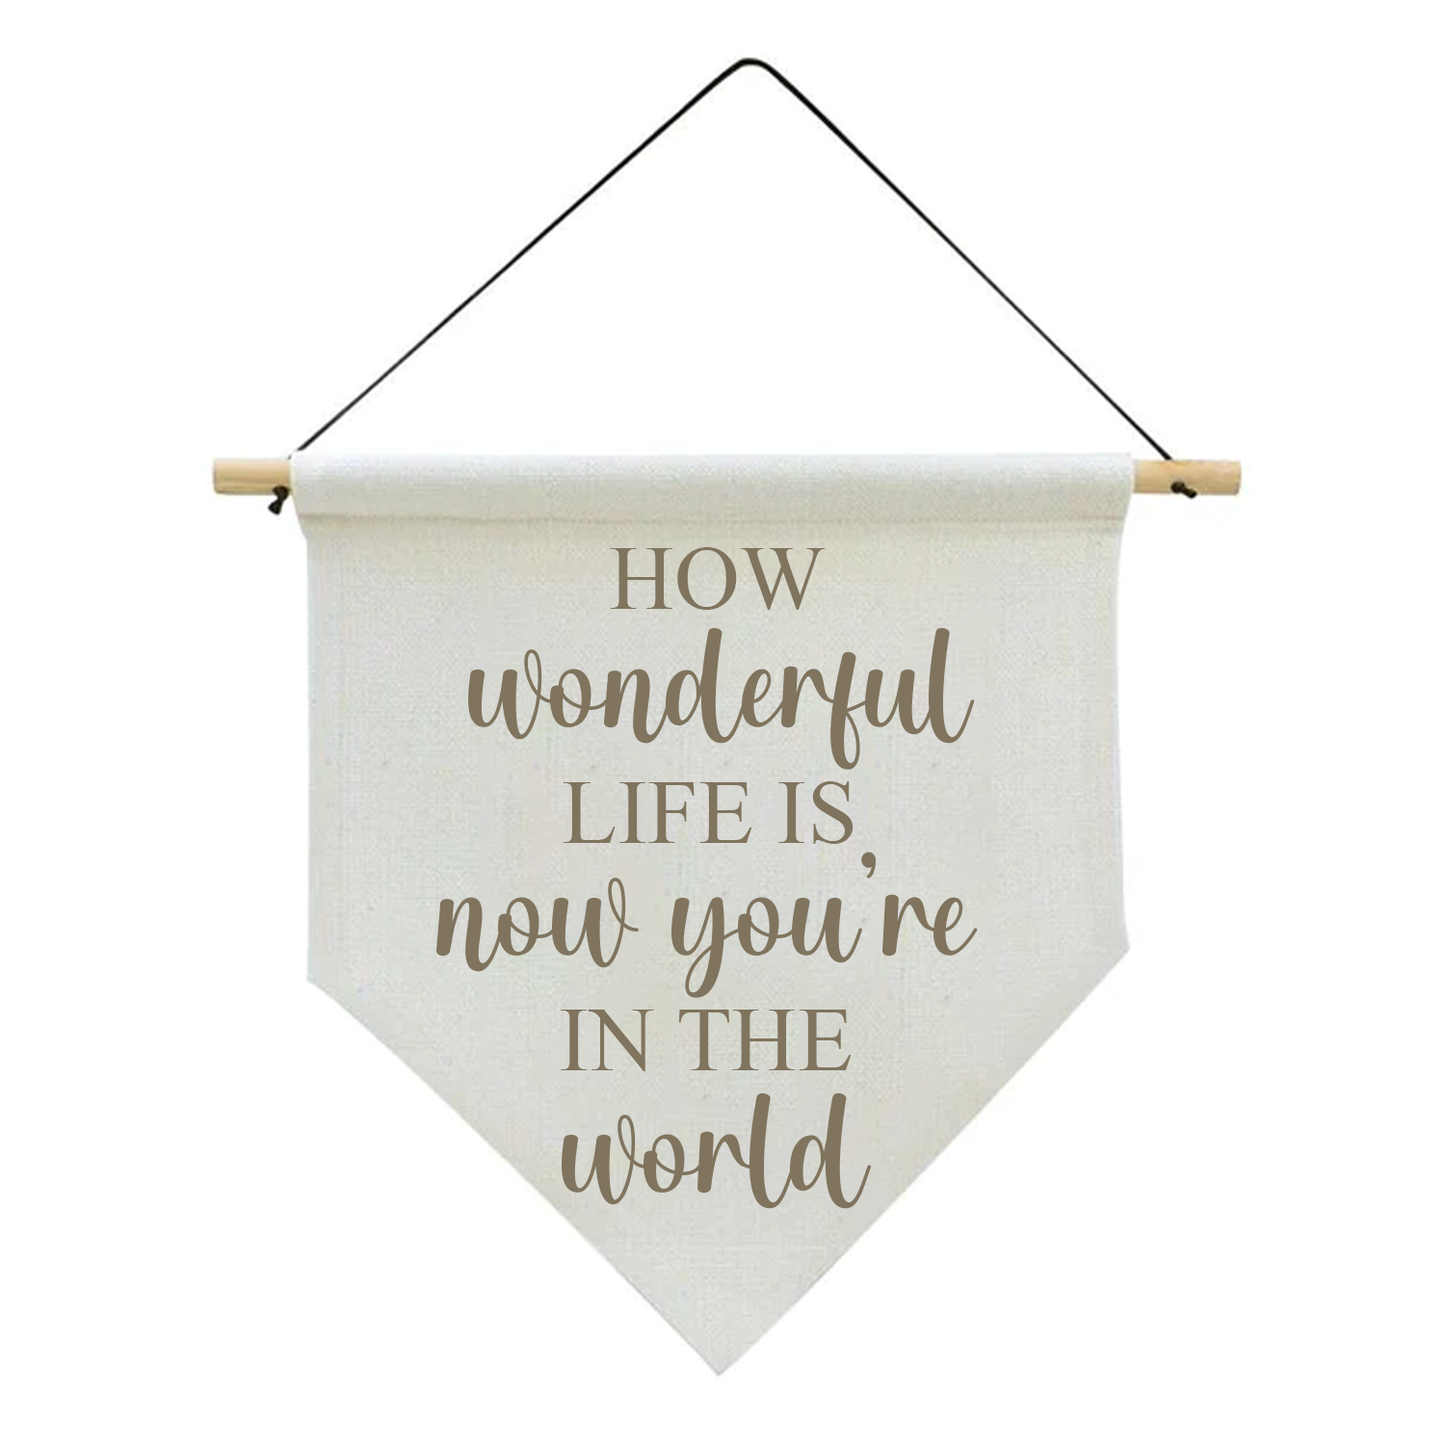 How Wonderful Life Is Now You're In The Word - Linen Flag Nursery/Room Decoration